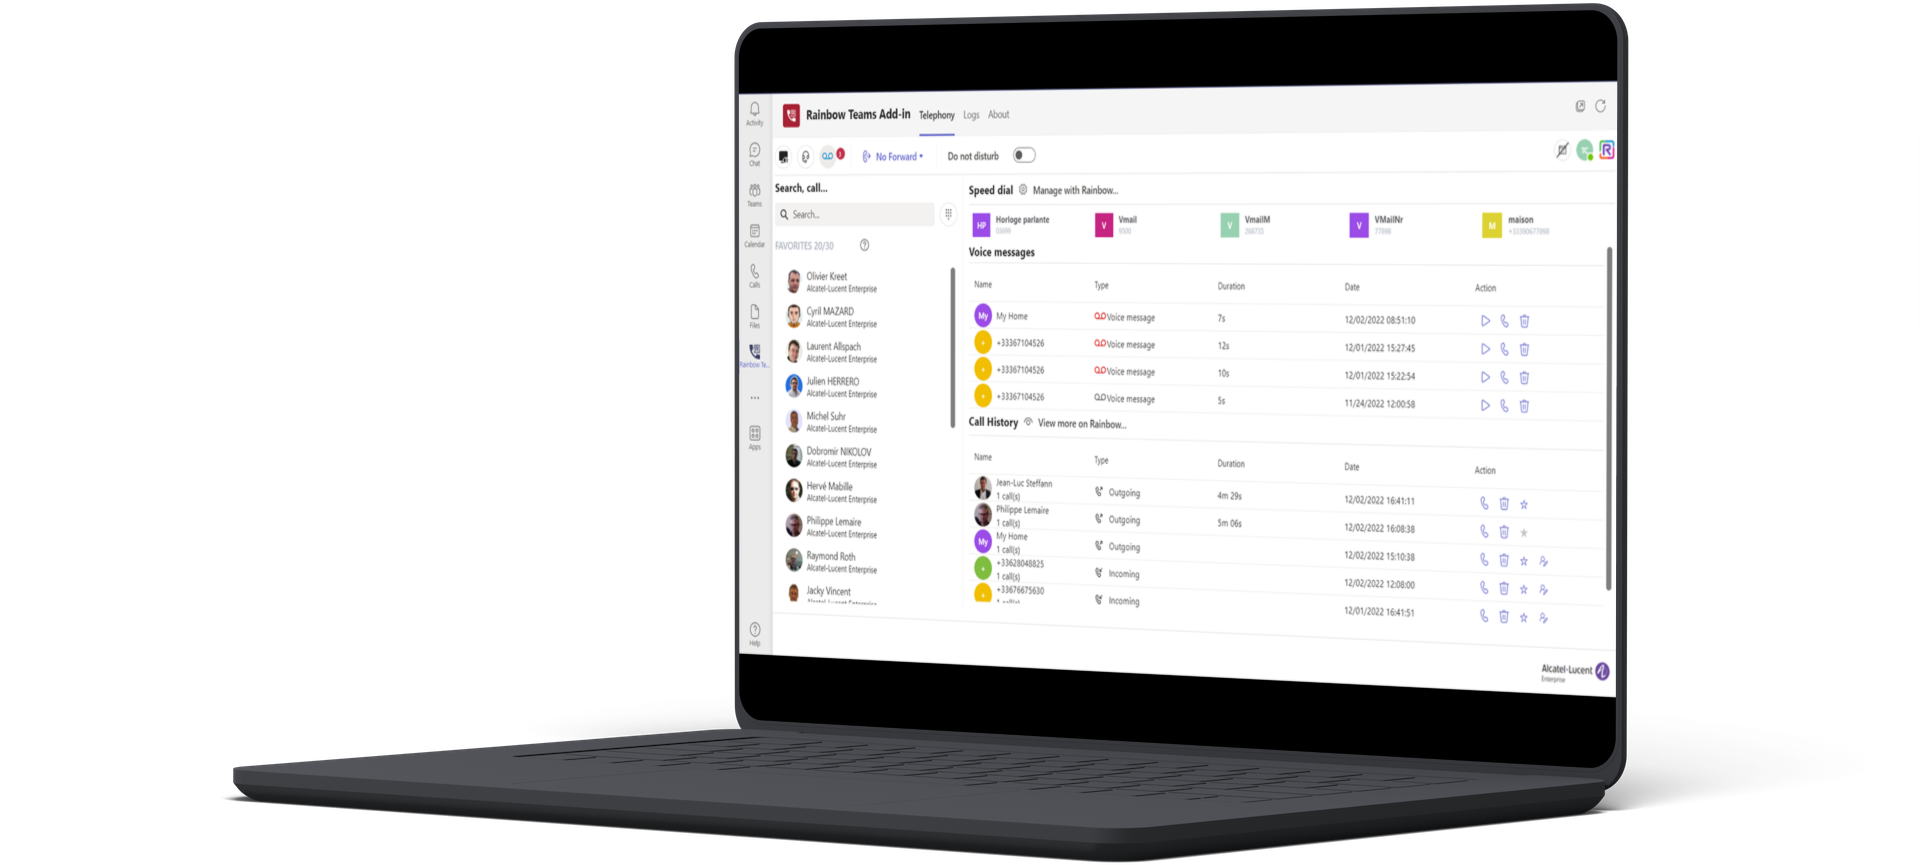 Open laptop with the Rainbow Telephony for Microsoft Teams interface